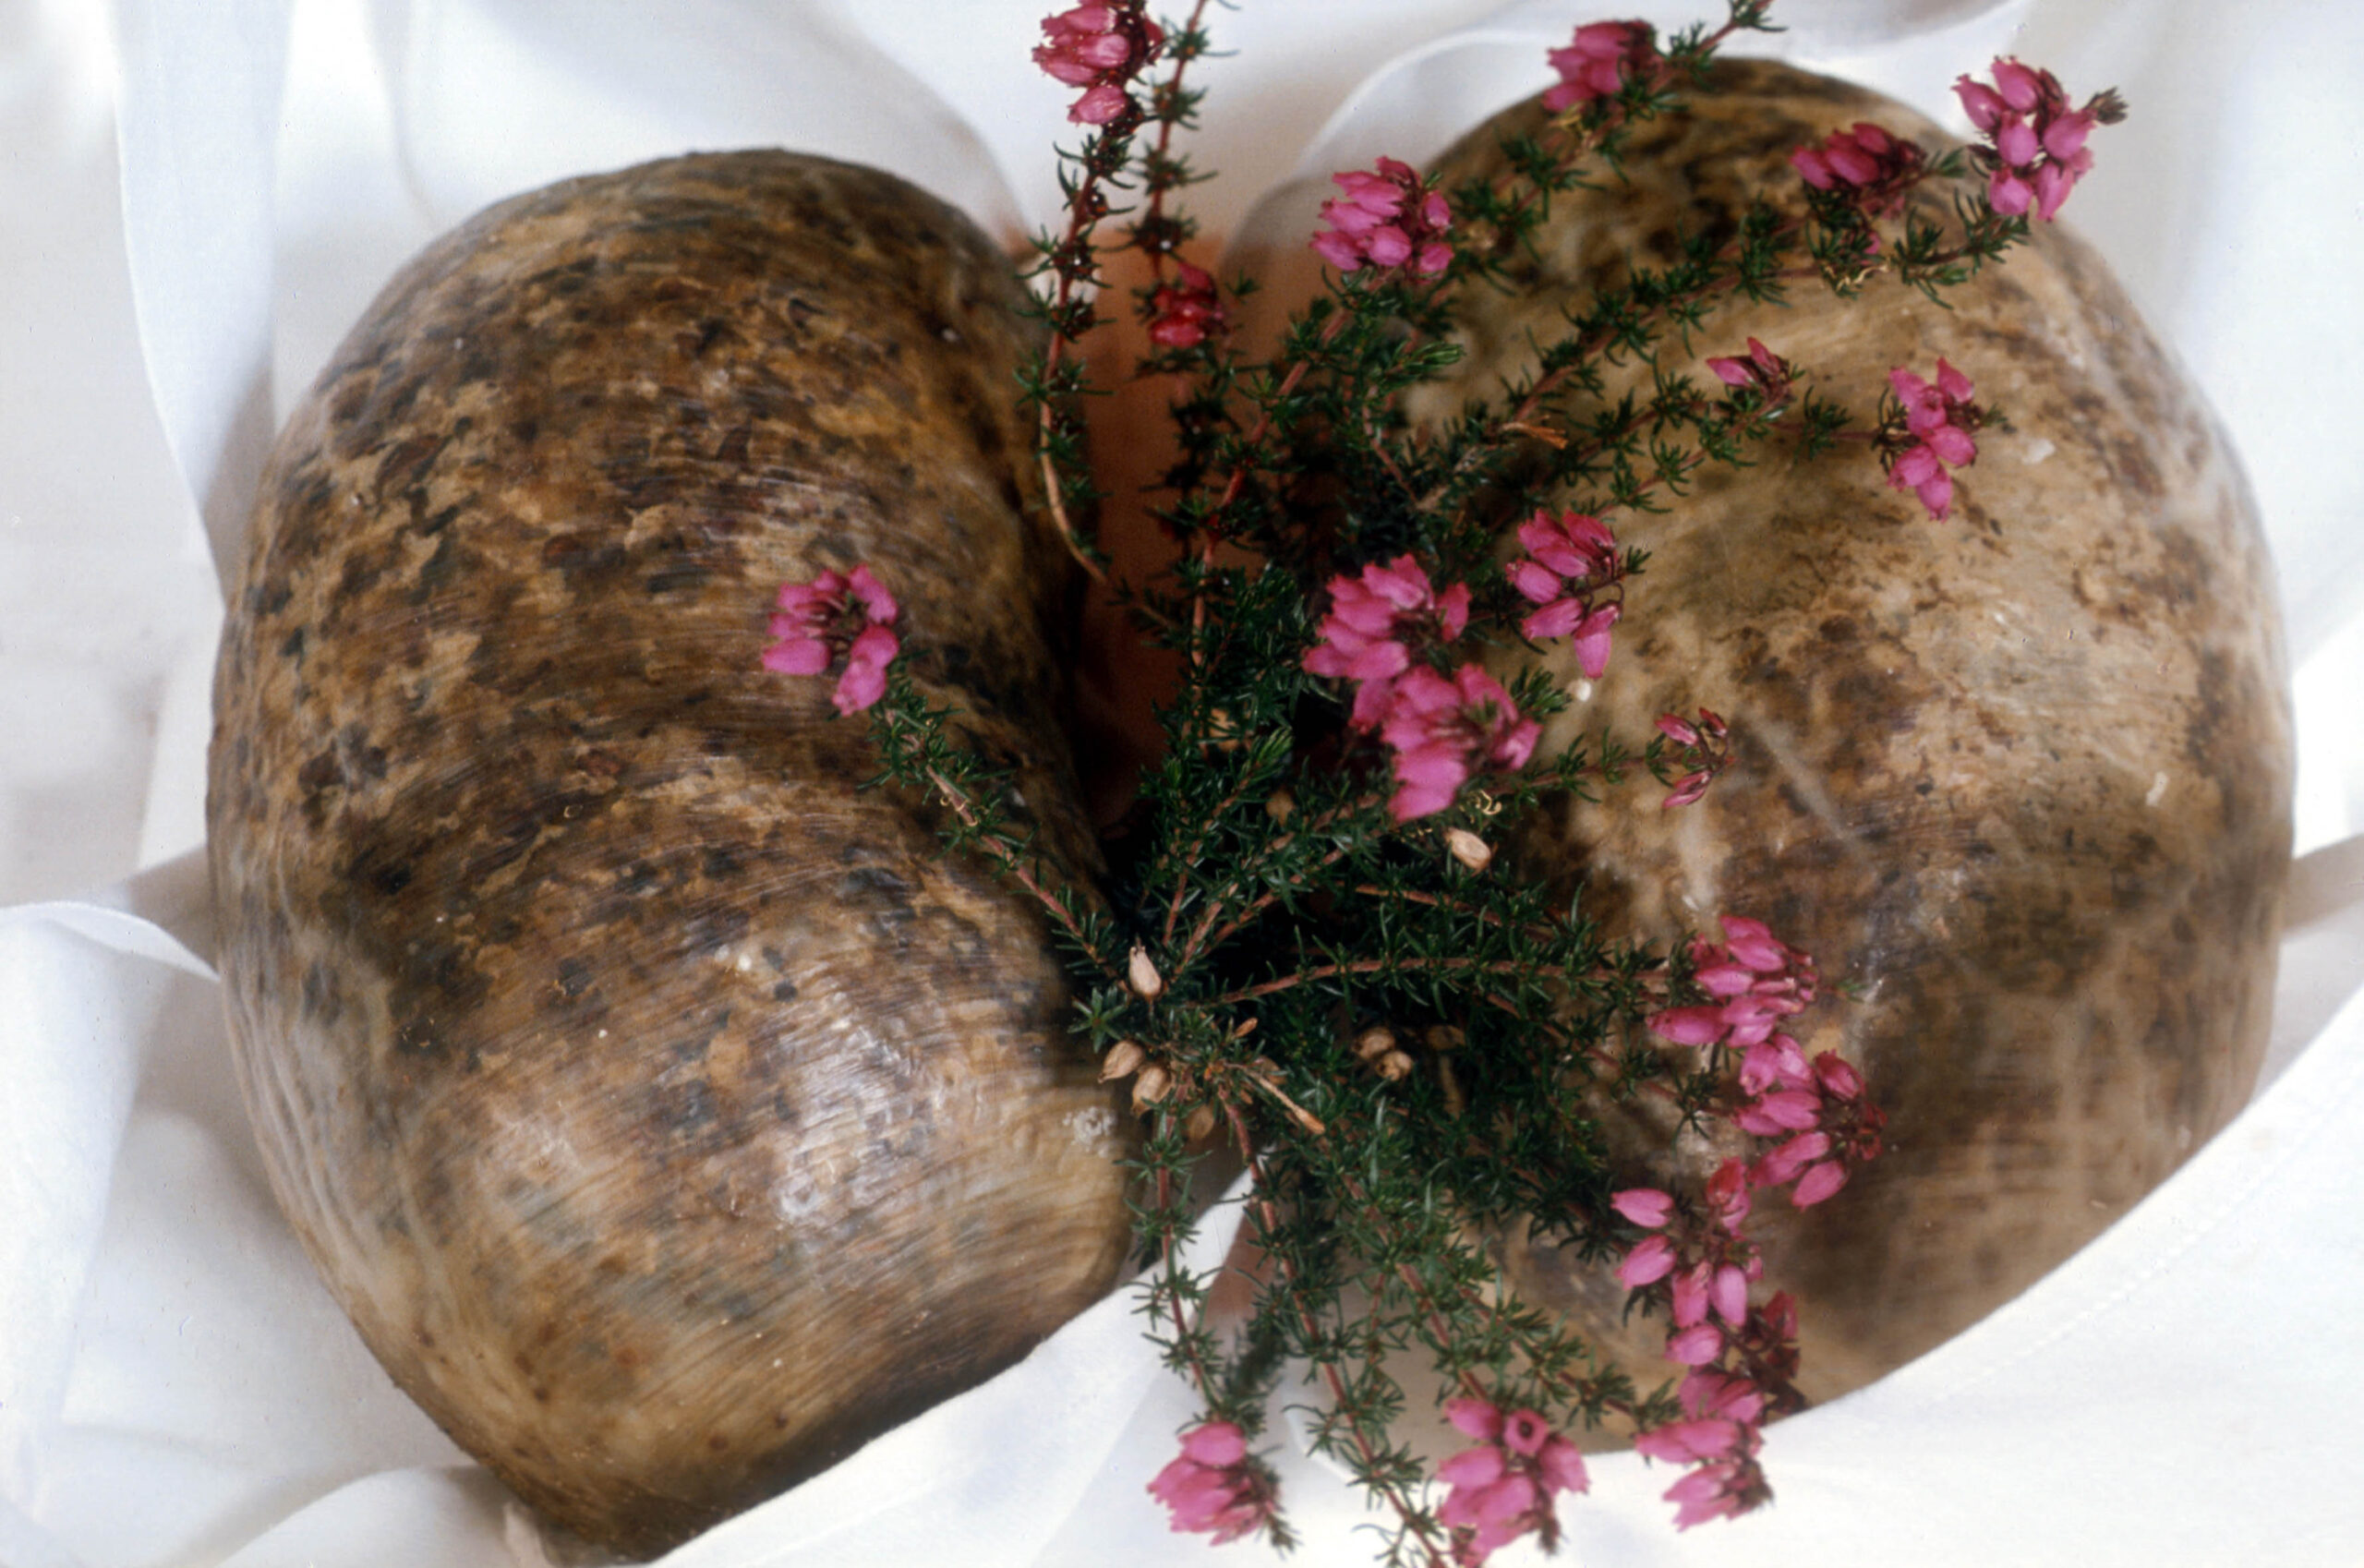 Uncooked Haggis with a sprig of heather (Photo Credit: Scottish Viewpoint)